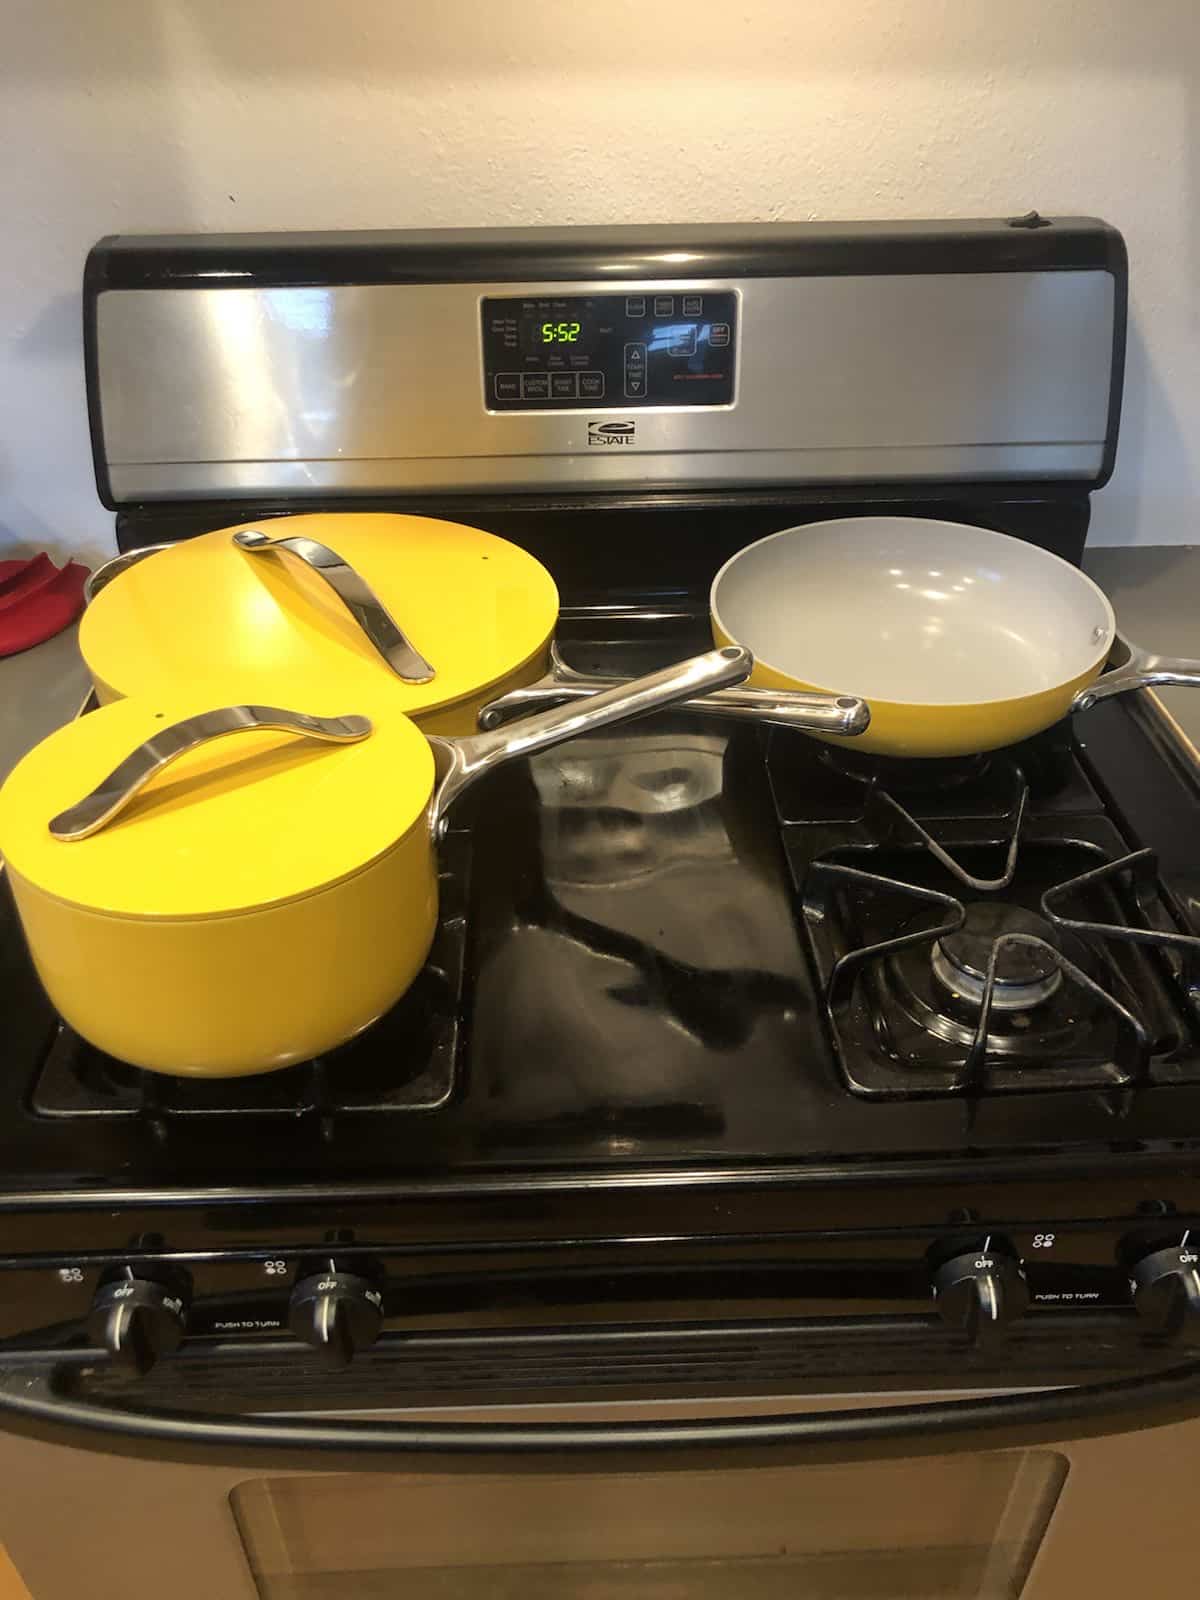 https://www.leafscore.com/wp-content/uploads/2022/10/Carway-cookware-set-on-stove.jpg